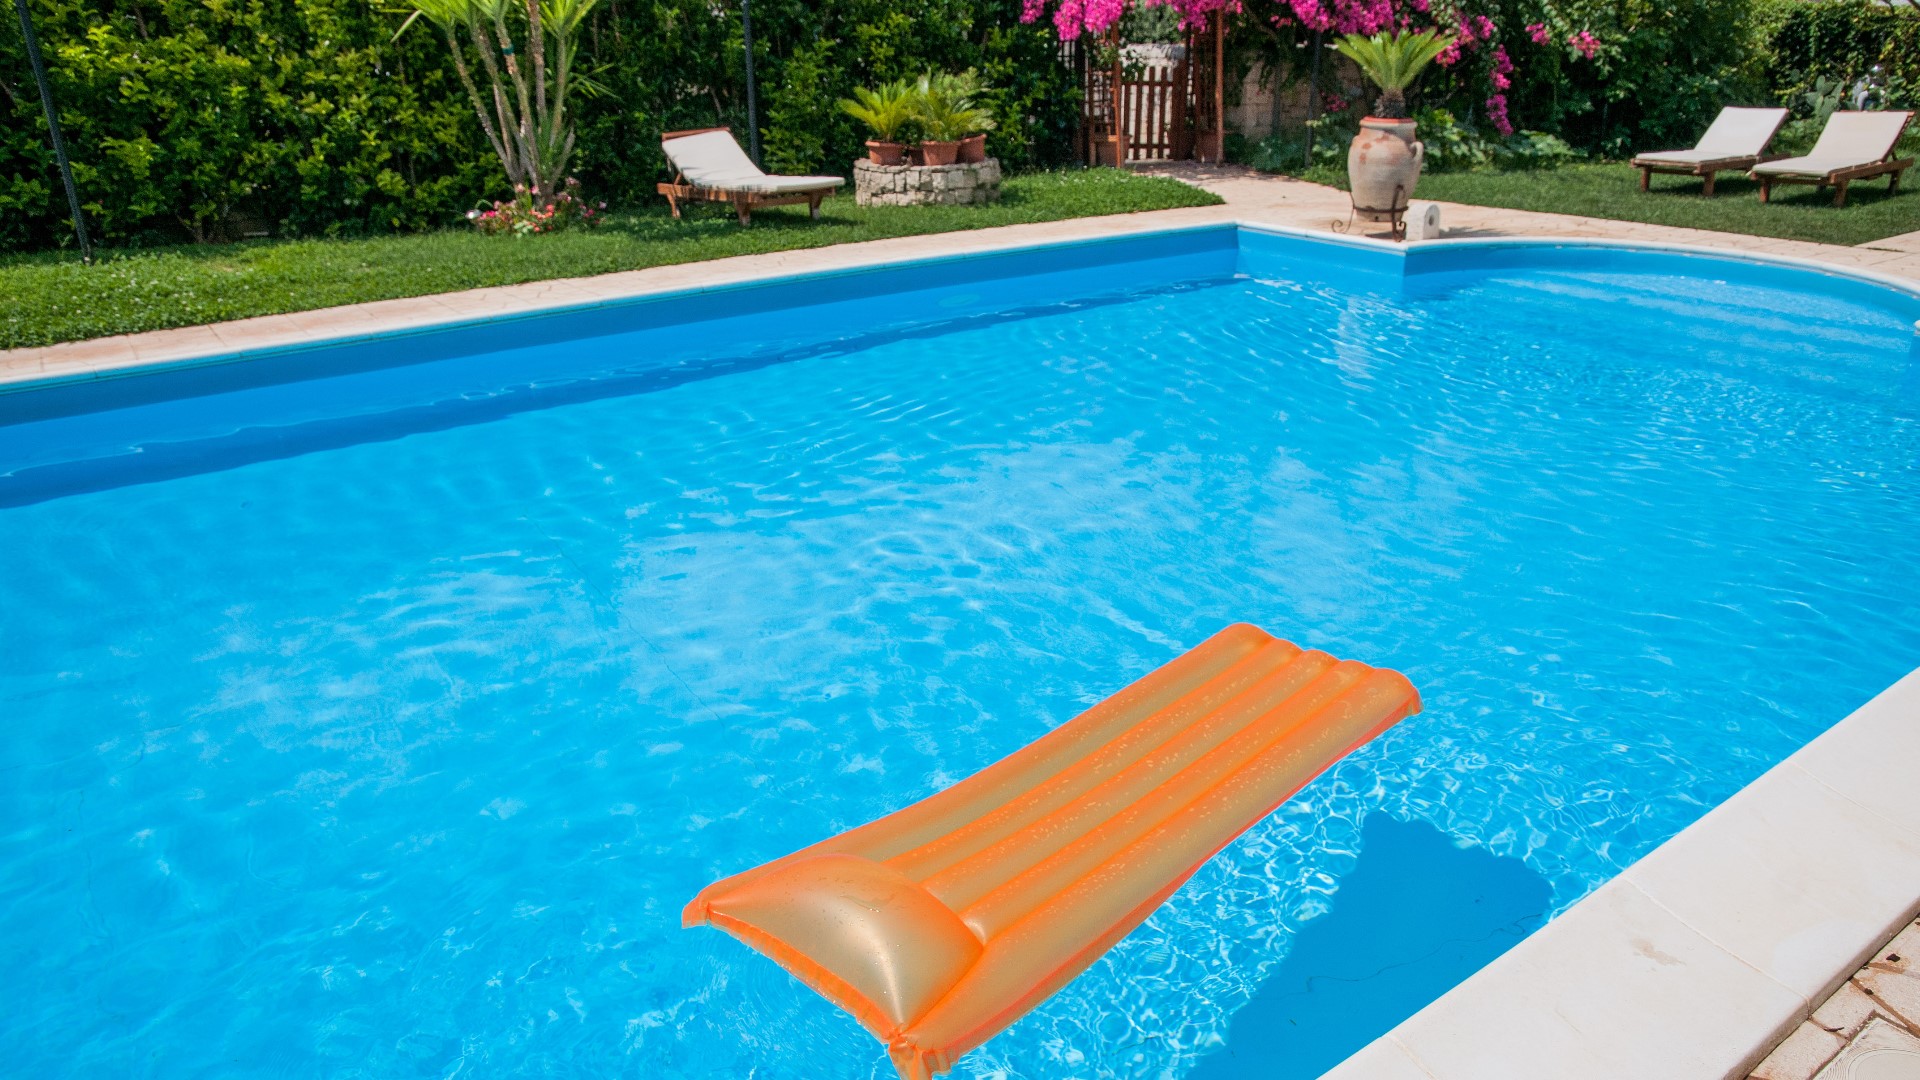 Pool businesses are having a hard time keeping up due to supply chain shortages as a result of COVID-19.